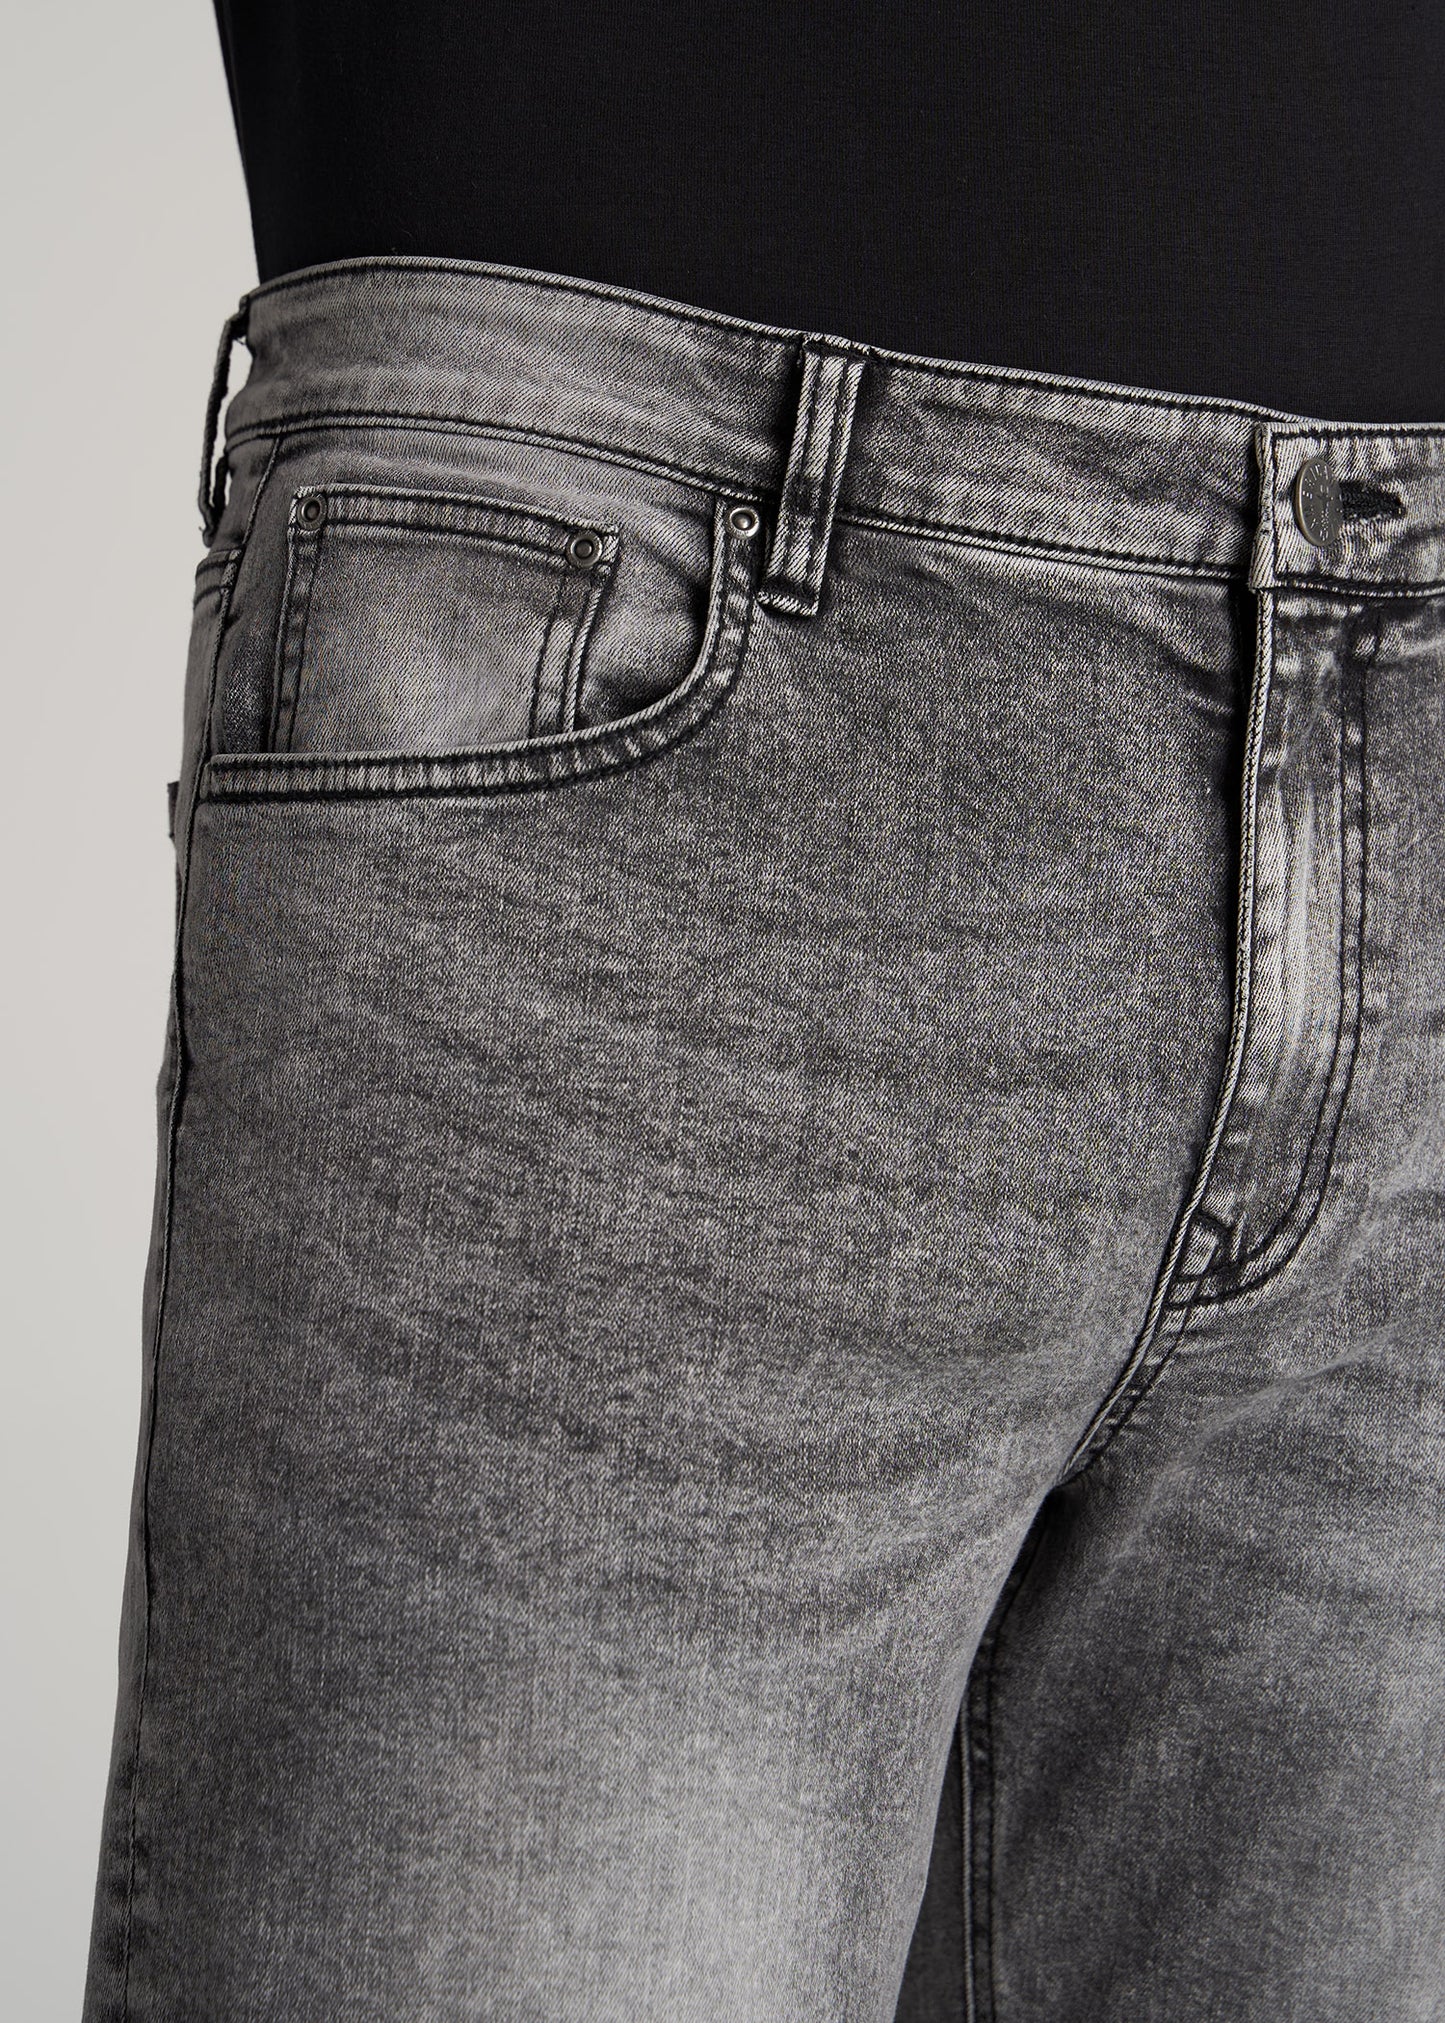    American-Tall-Men-J1-Jeans-Washed-Faded-Black-pocket